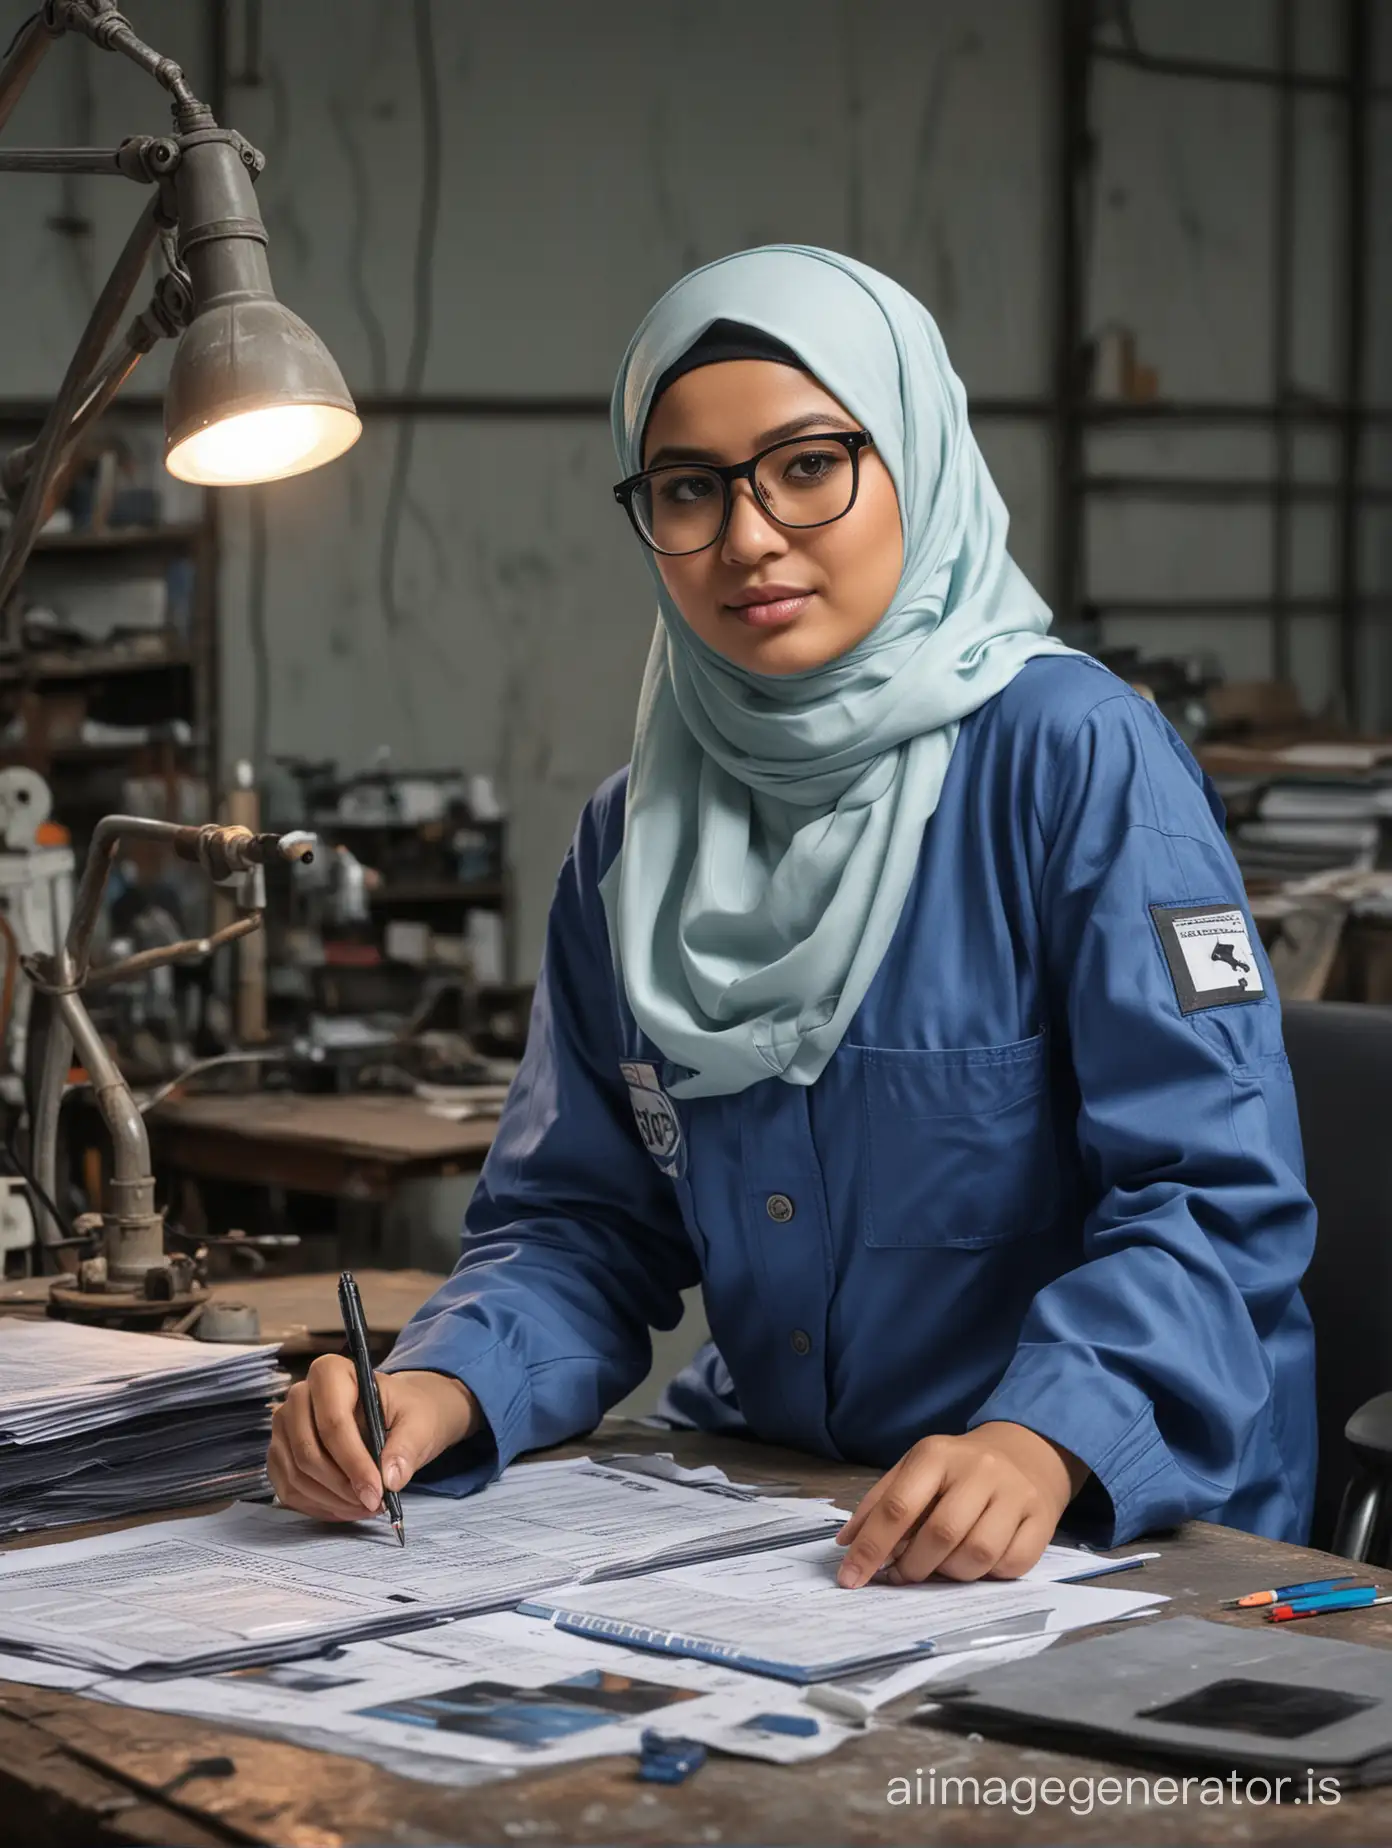 Curvy with  cleavage showing Indonesian muslim Engineer women busy working at her desk wearing blue coverall With reflectors. Wearing hijab and clear glasses with black frames, Her table if messy with documents, her background scene is oil and gas plant.